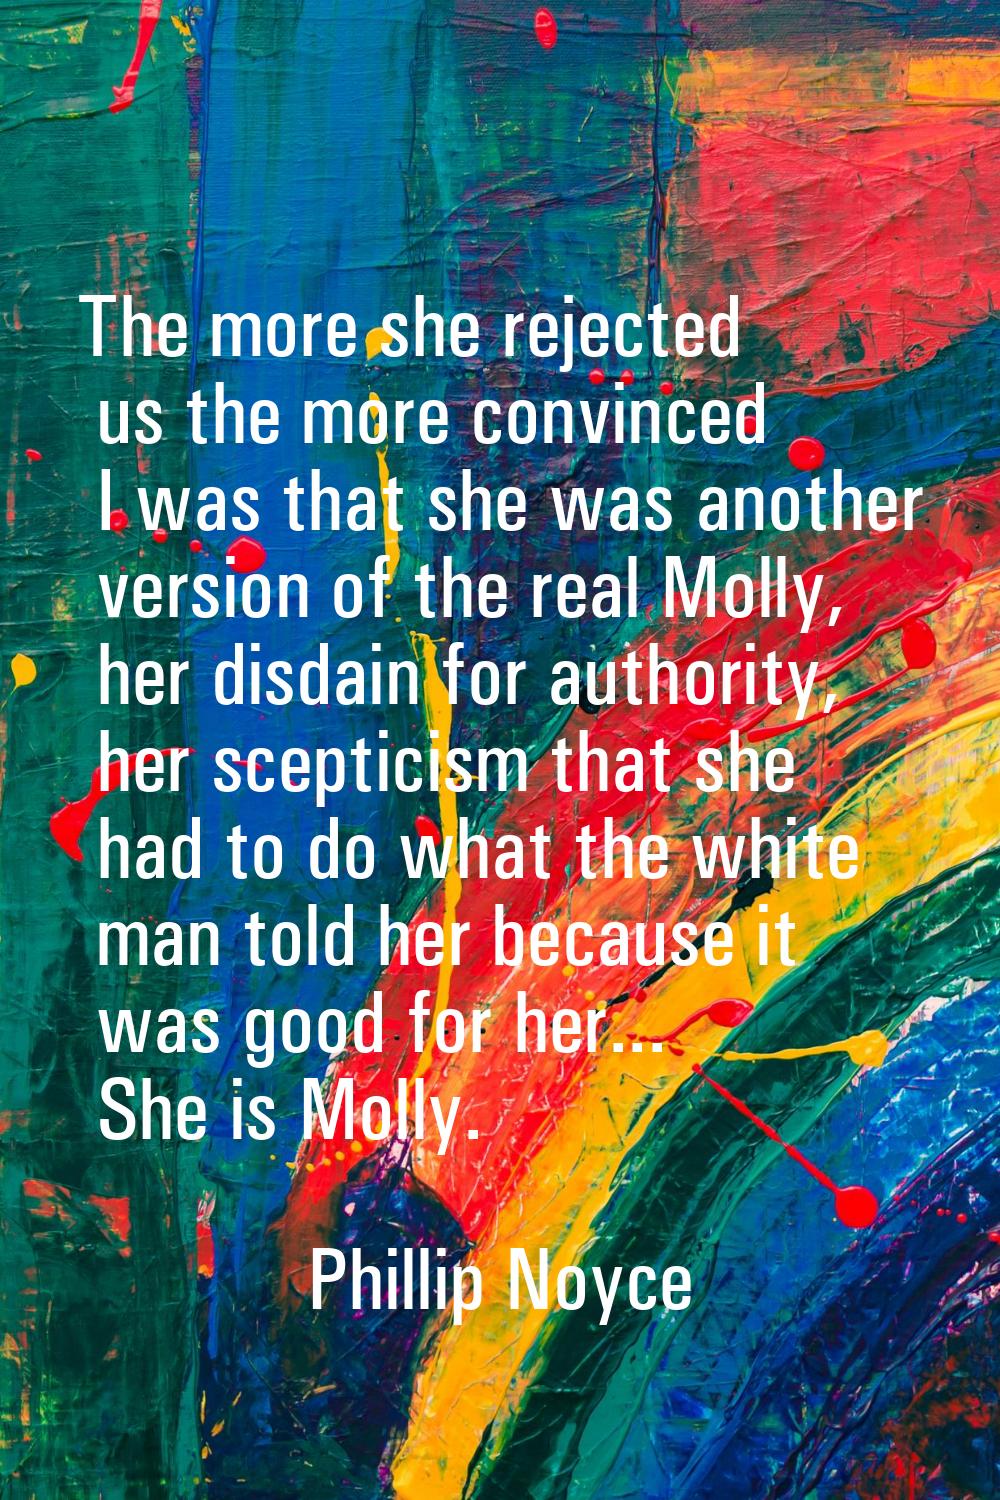 The more she rejected us the more convinced I was that she was another version of the real Molly, h